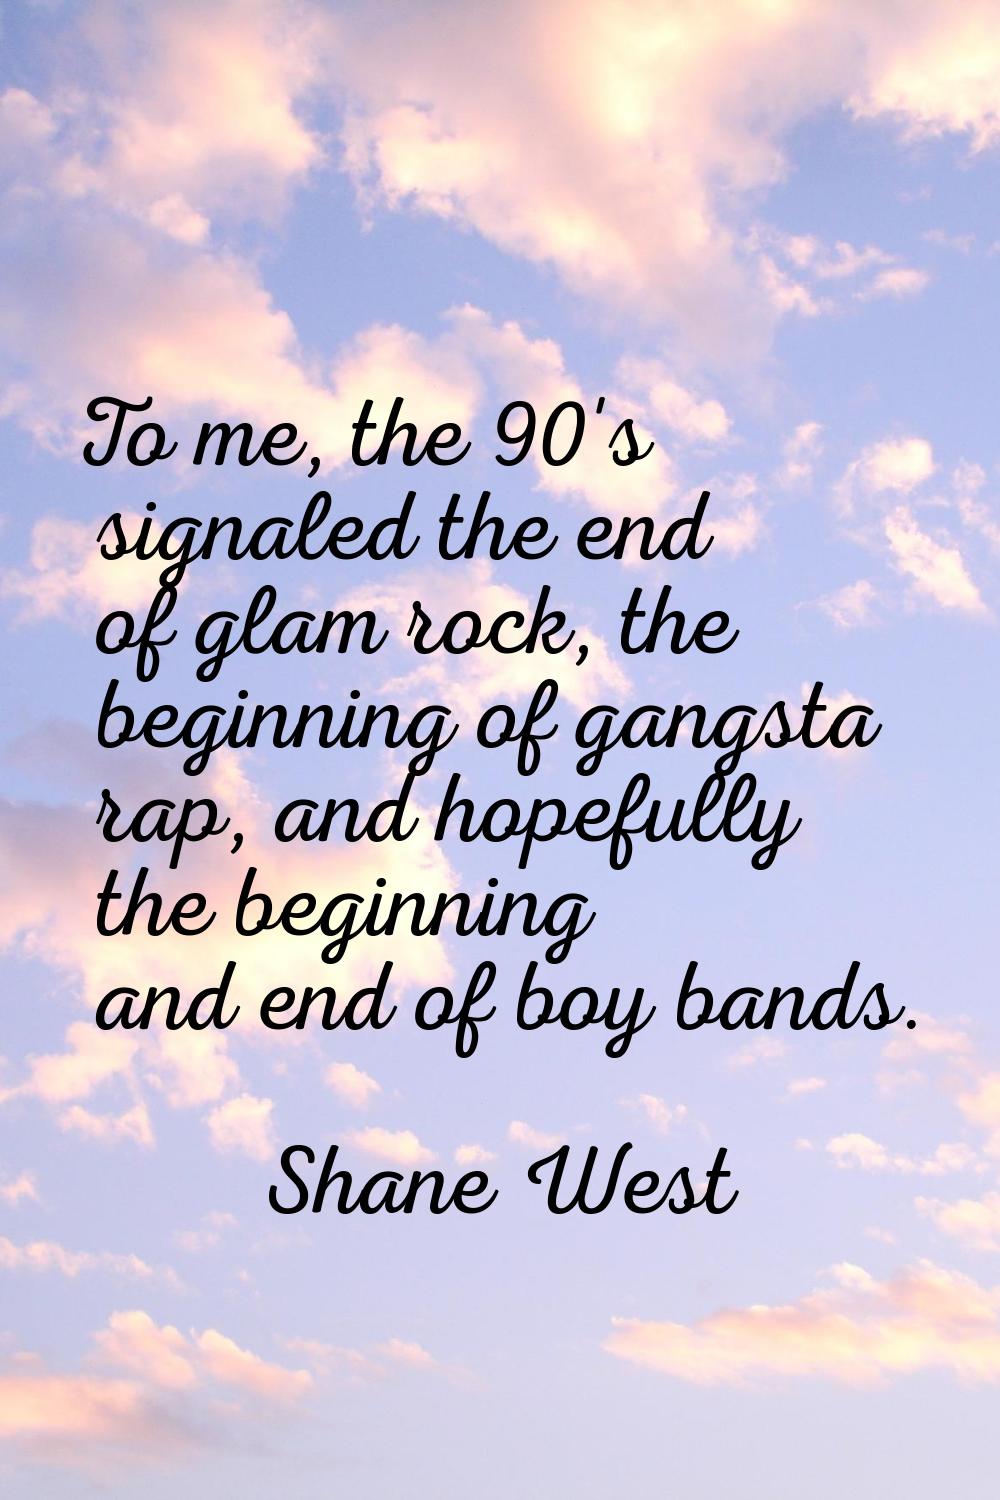 To me, the 90's signaled the end of glam rock, the beginning of gangsta rap, and hopefully the begi